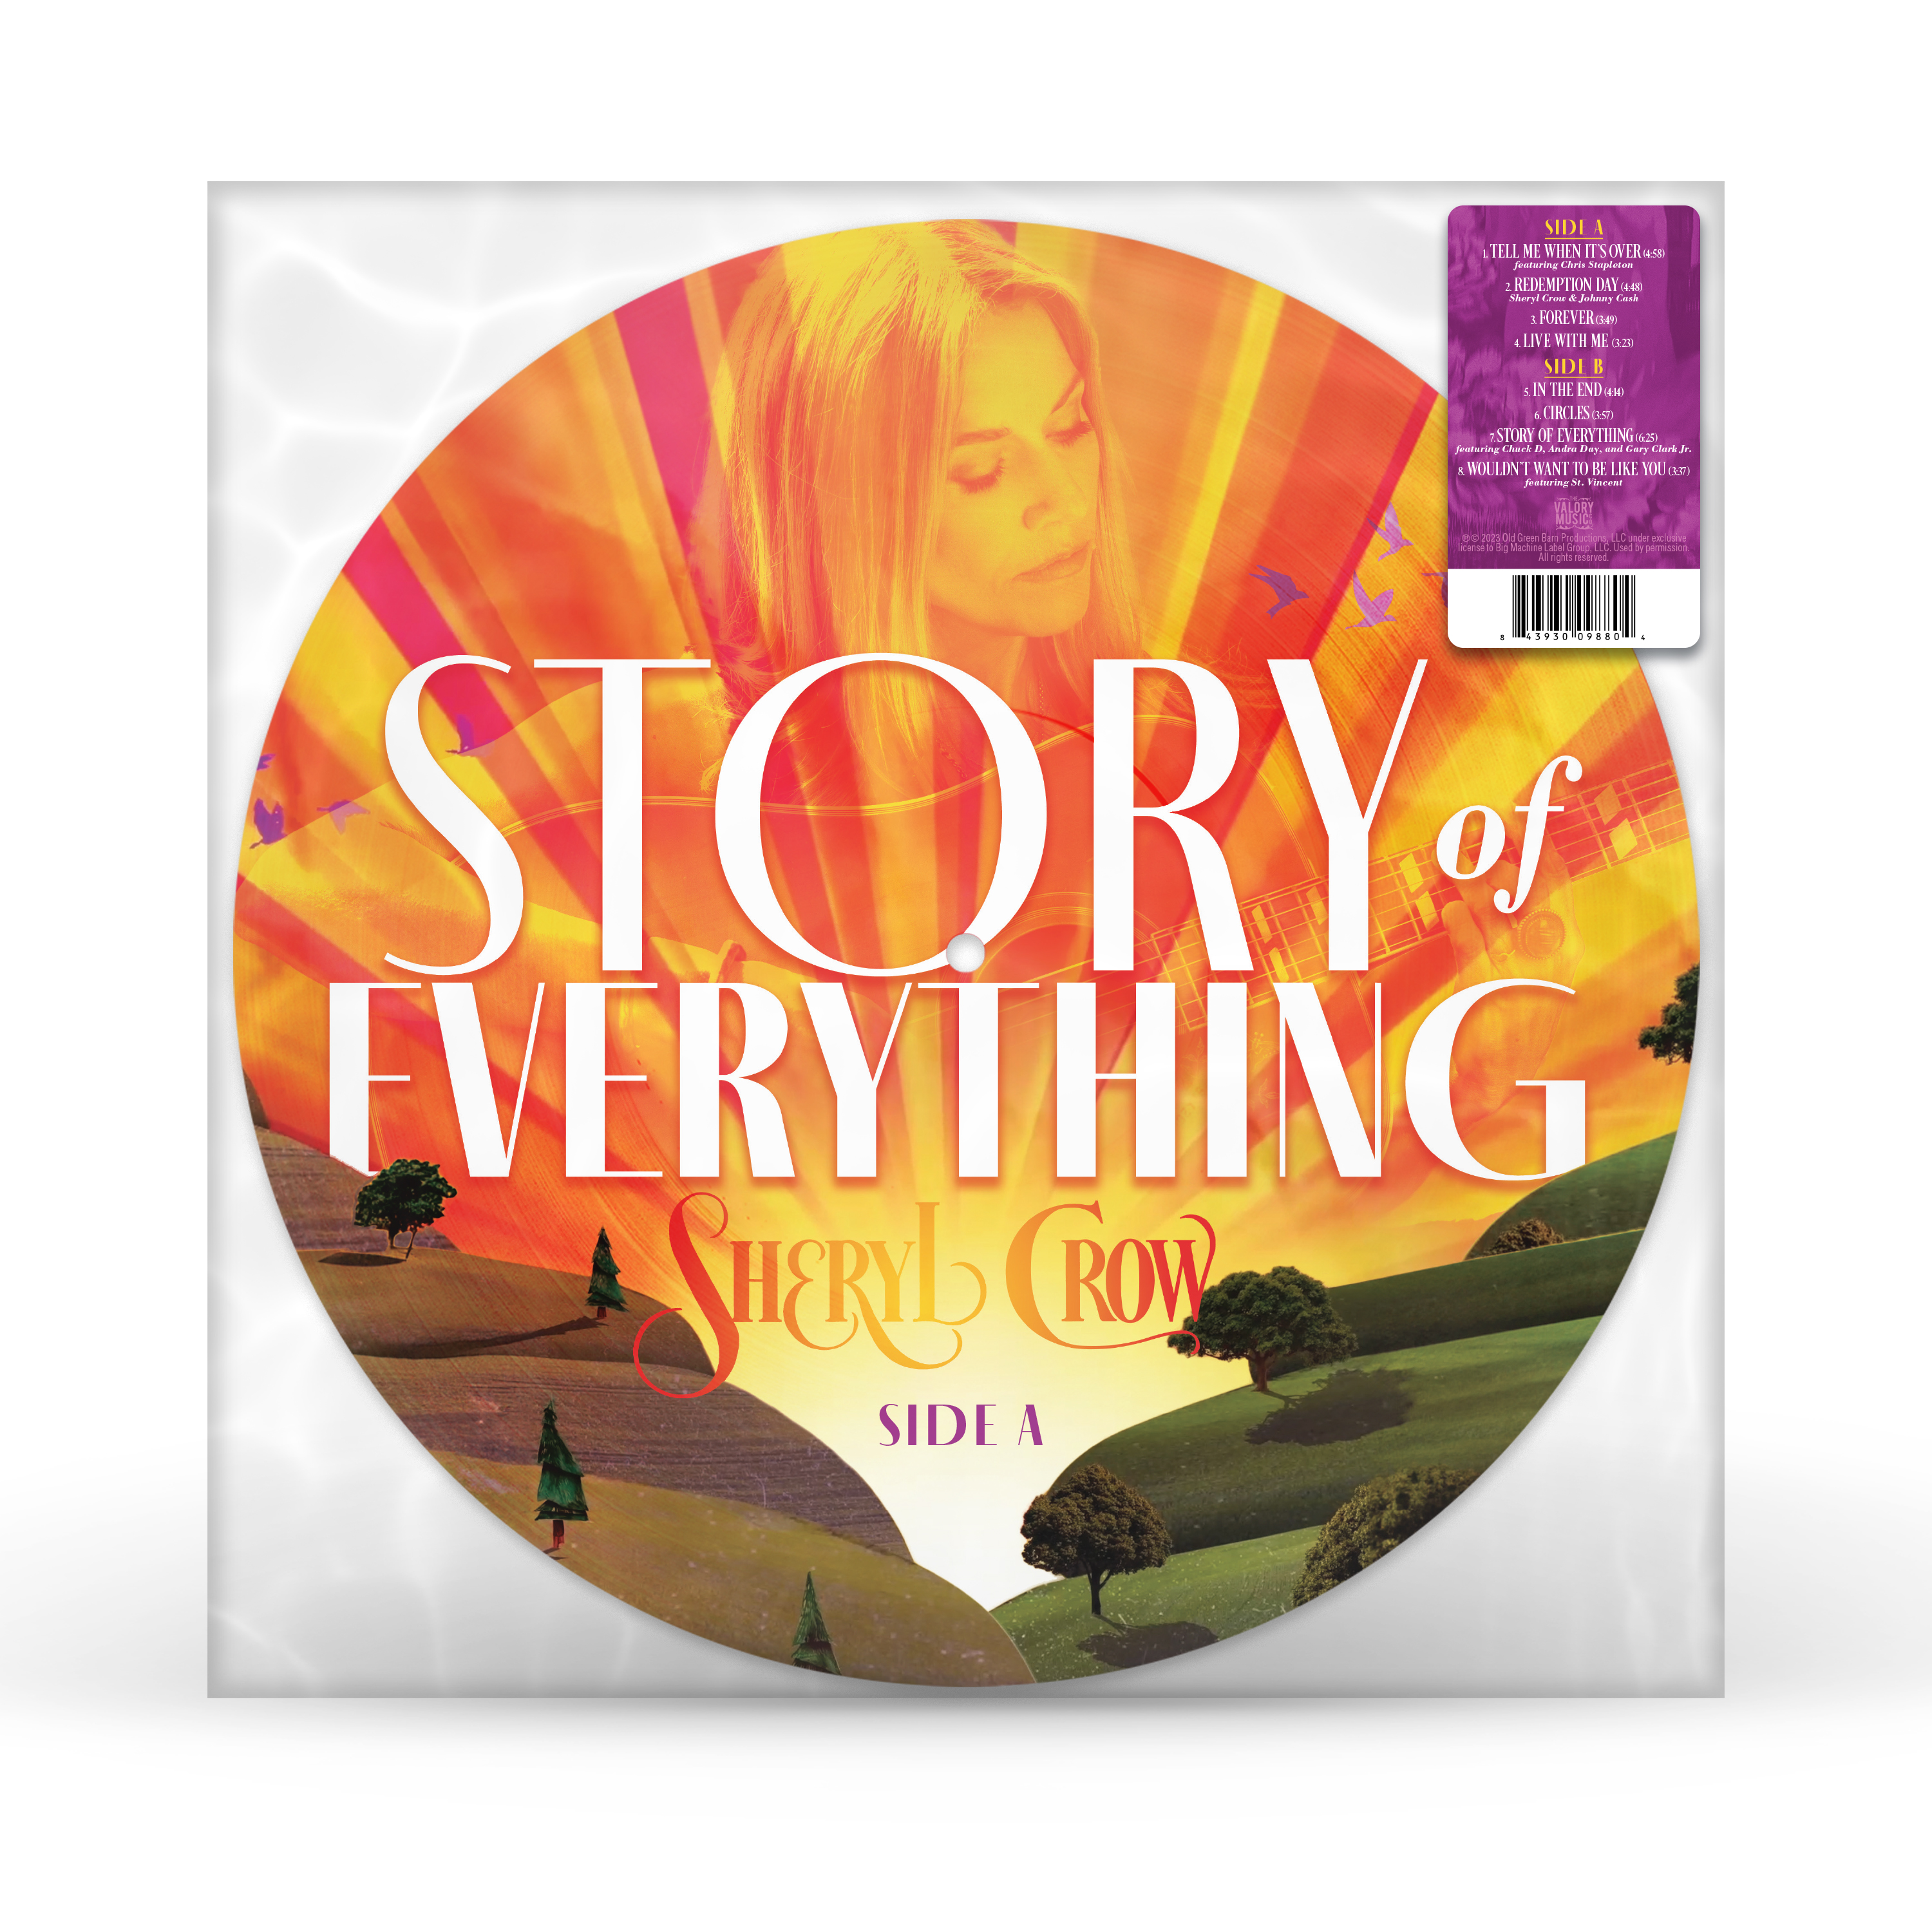 CD Shop - CROW, SHERYL STORY OF EVERYTHING